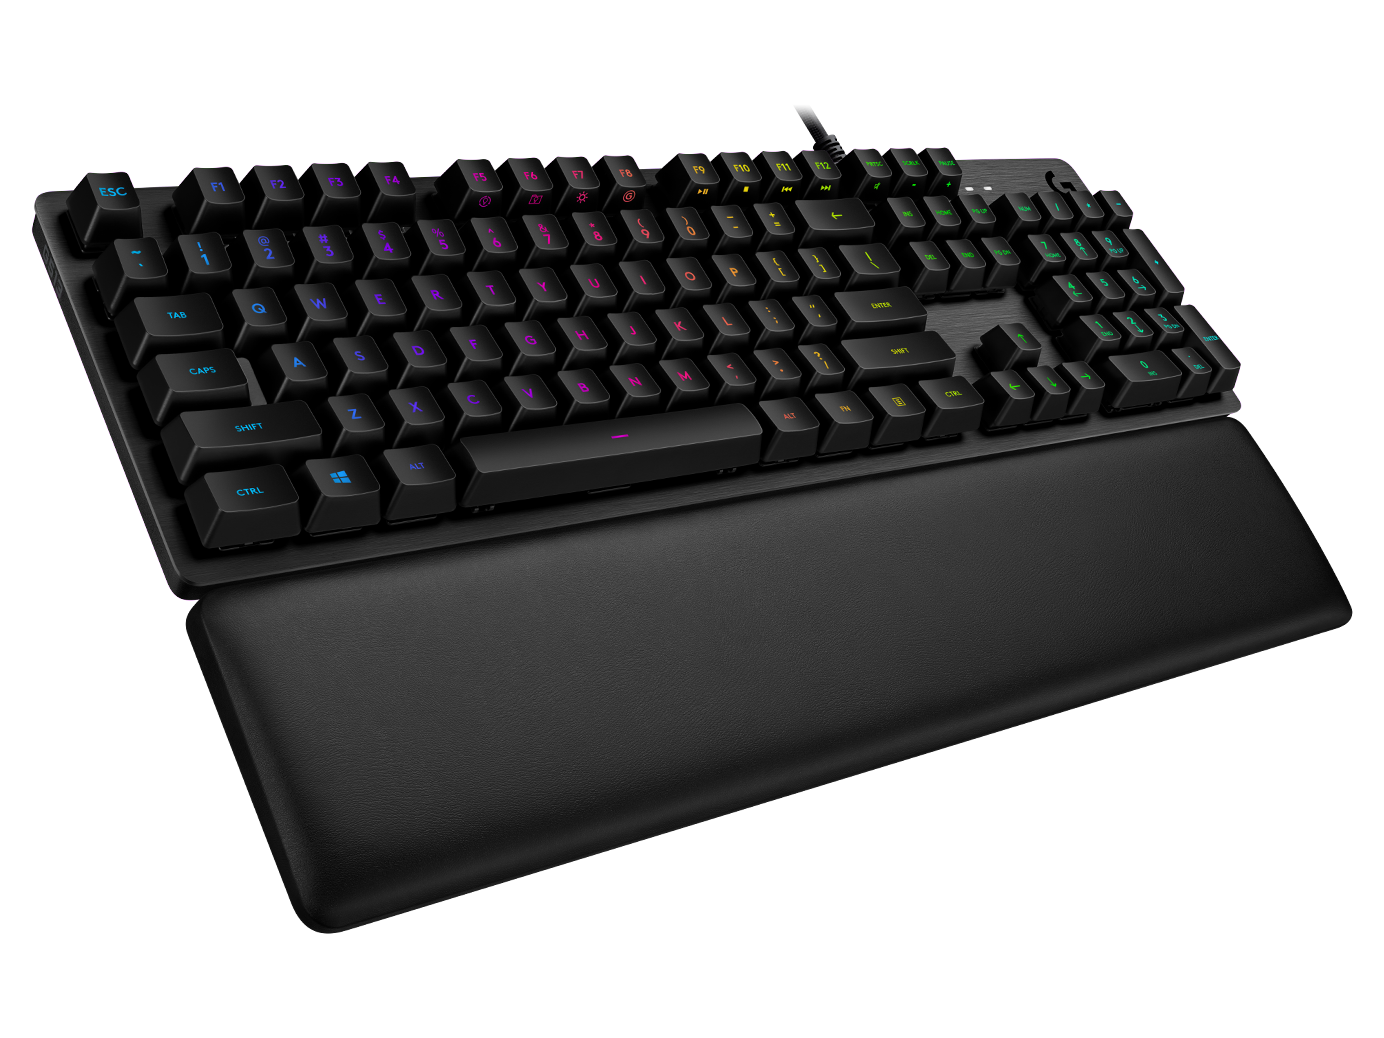 G513 CARBON and SILVER LIGHTSYNC RGB Mechanical Gaming Keyboard with  Palmrest